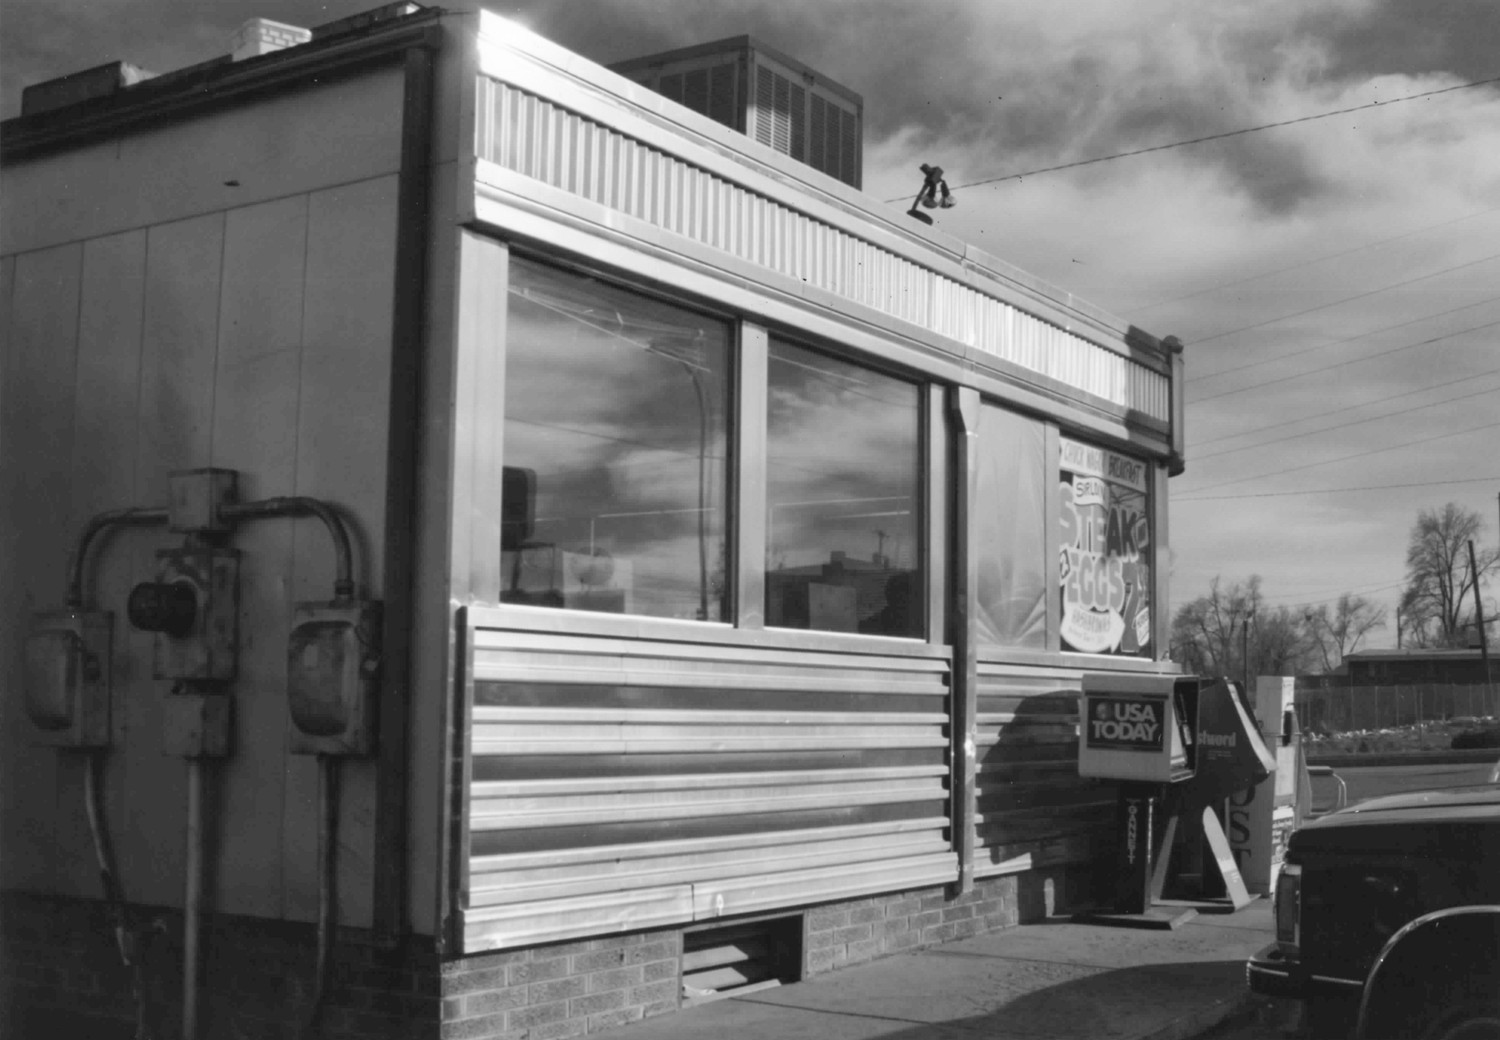 Davies' Chuck Wagon Diner, Lakewood Colorado Diner, west elevation, facing east (1997)